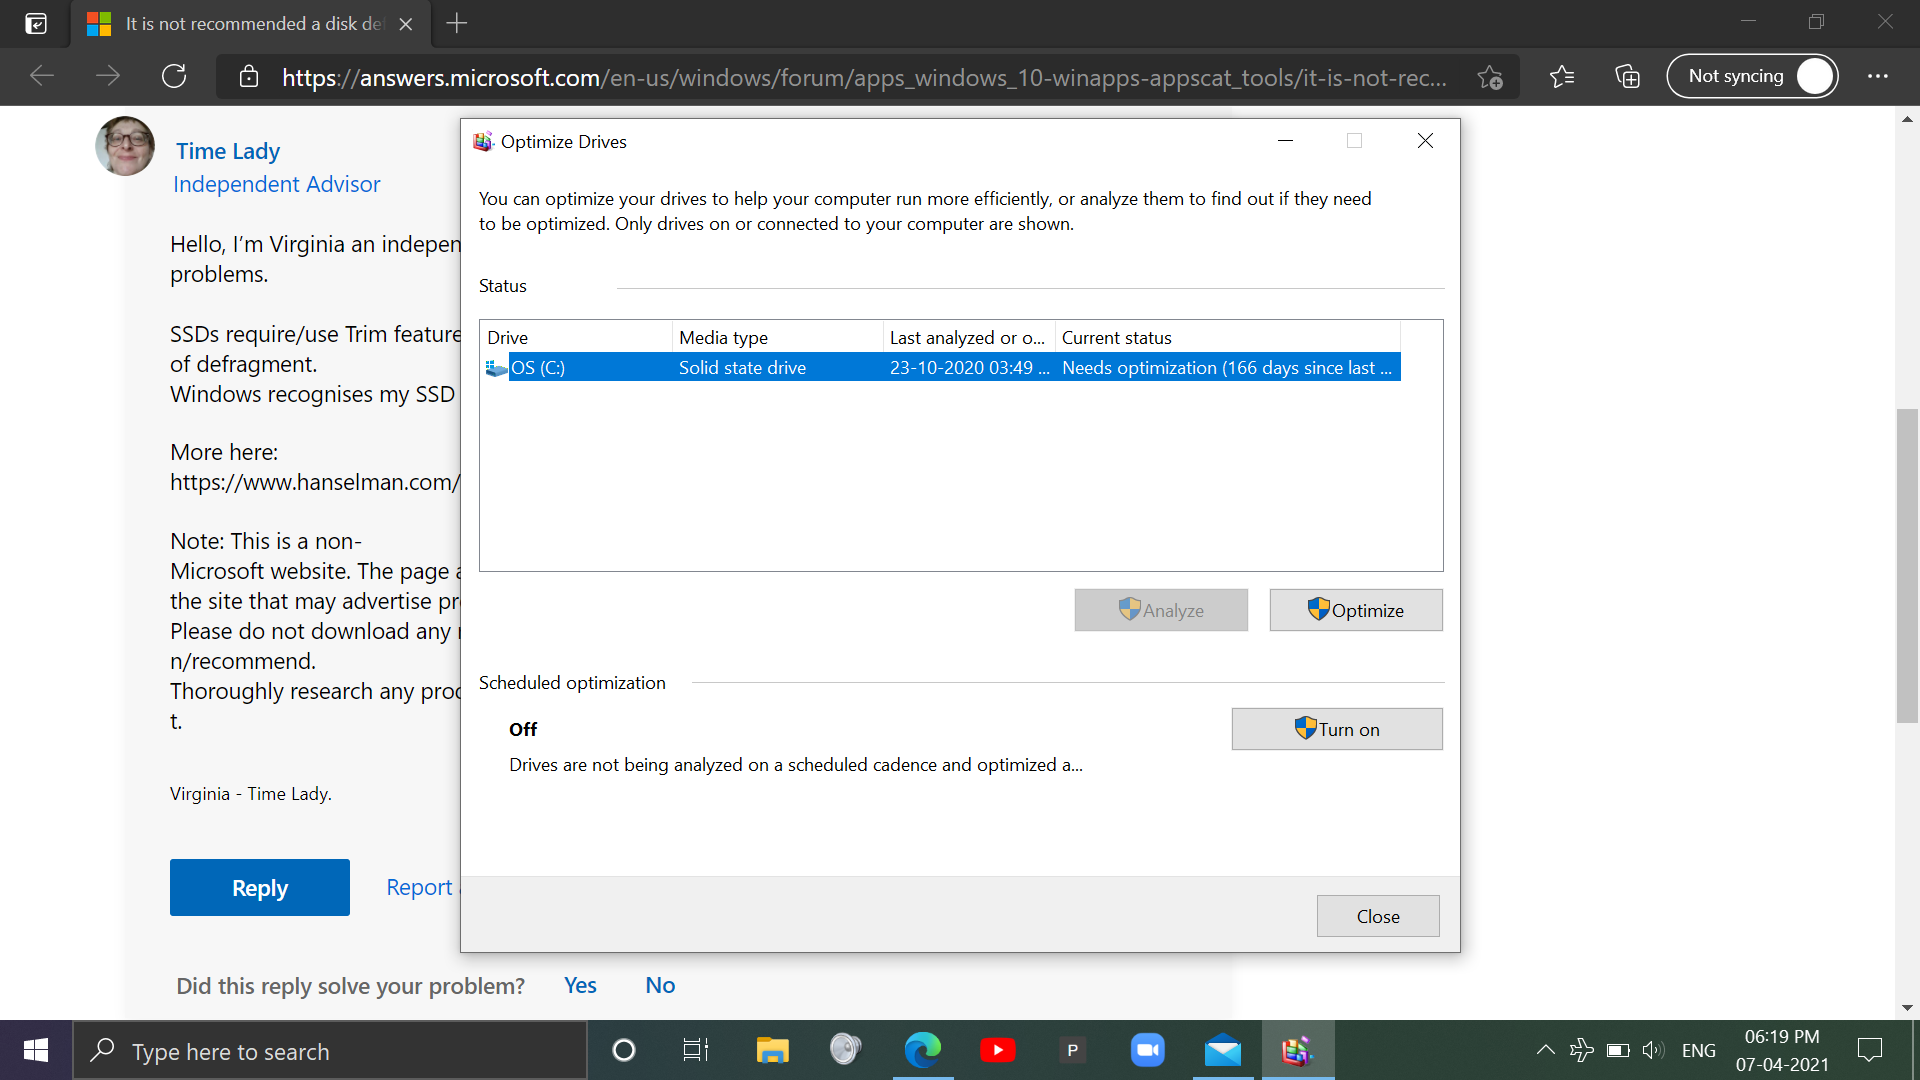 It is not recommended a disk defragmentation for an SSD then why windows says to turn on it... e50a37f4-48ff-4b25-8a00-90ba450ebcd8?upload=true.png